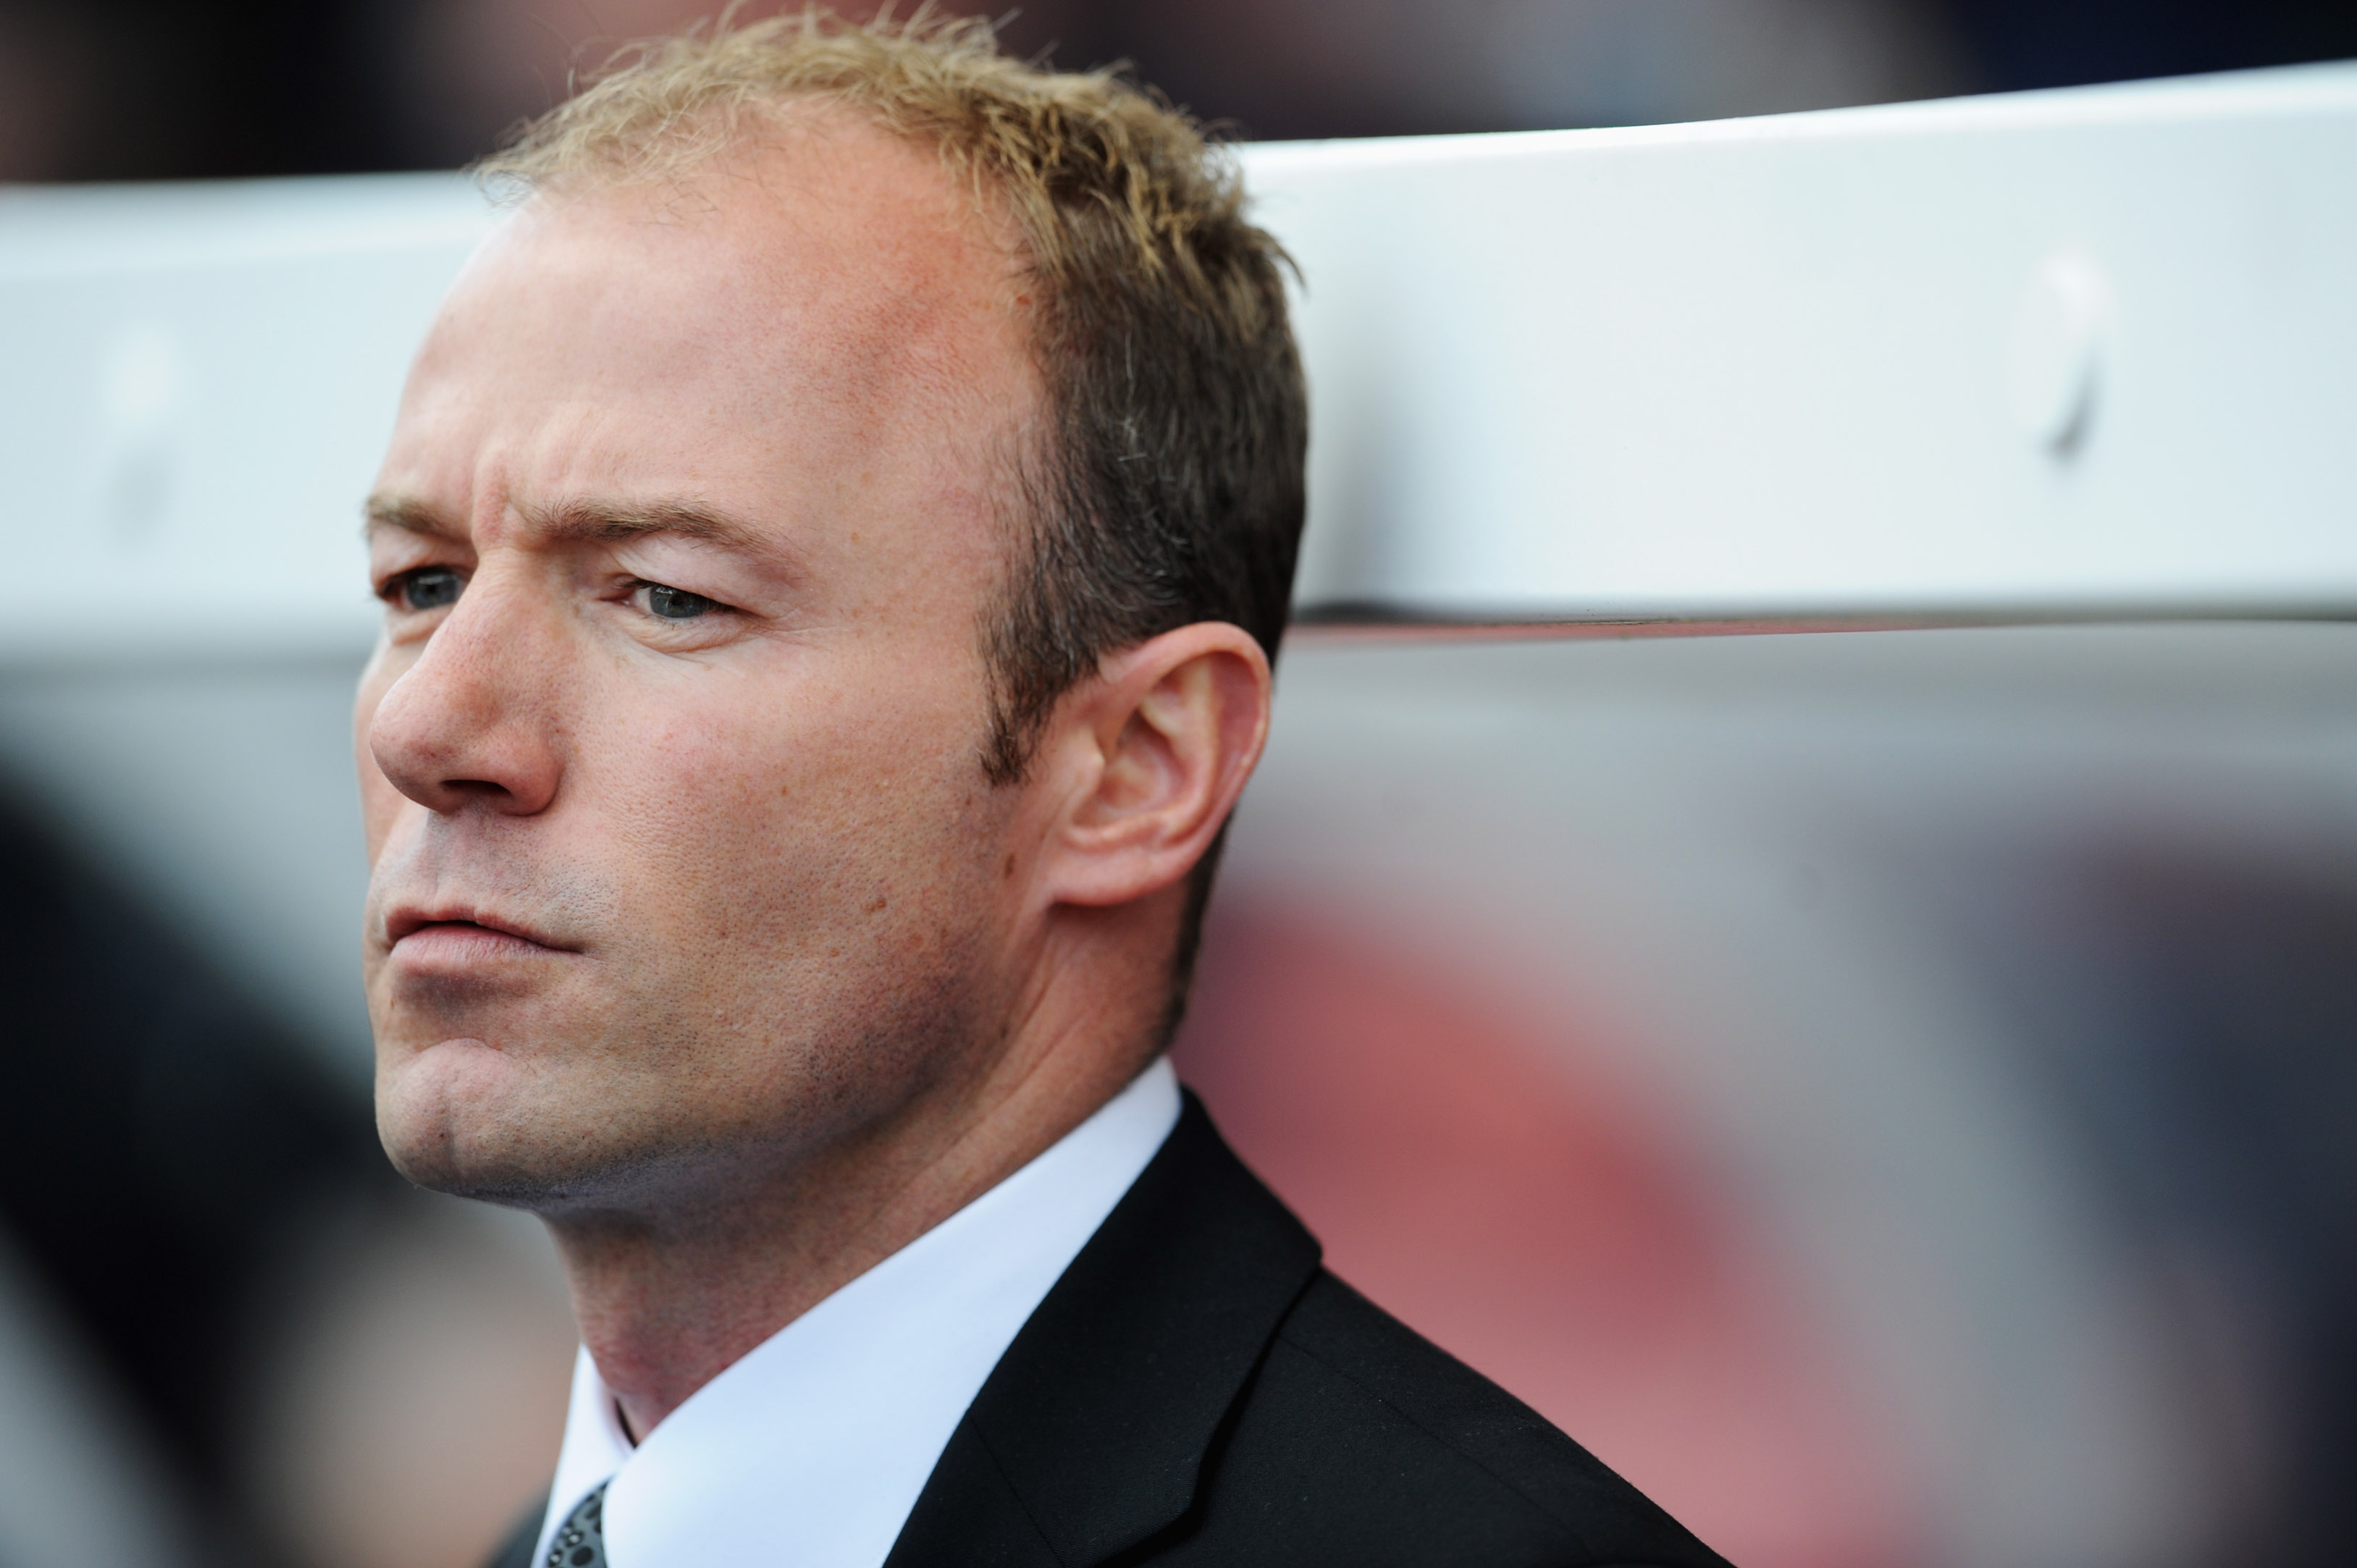 STOKE, UNITED KINGDOM - APRIL 11: Alan Shearer interim manager of Newcastle United looks thoughtful prior to the Barclays Premier League match between Stoke City and Newcastle United at the Britannia Stadium on April 11, 2009 in Stoke, England. (Photo b